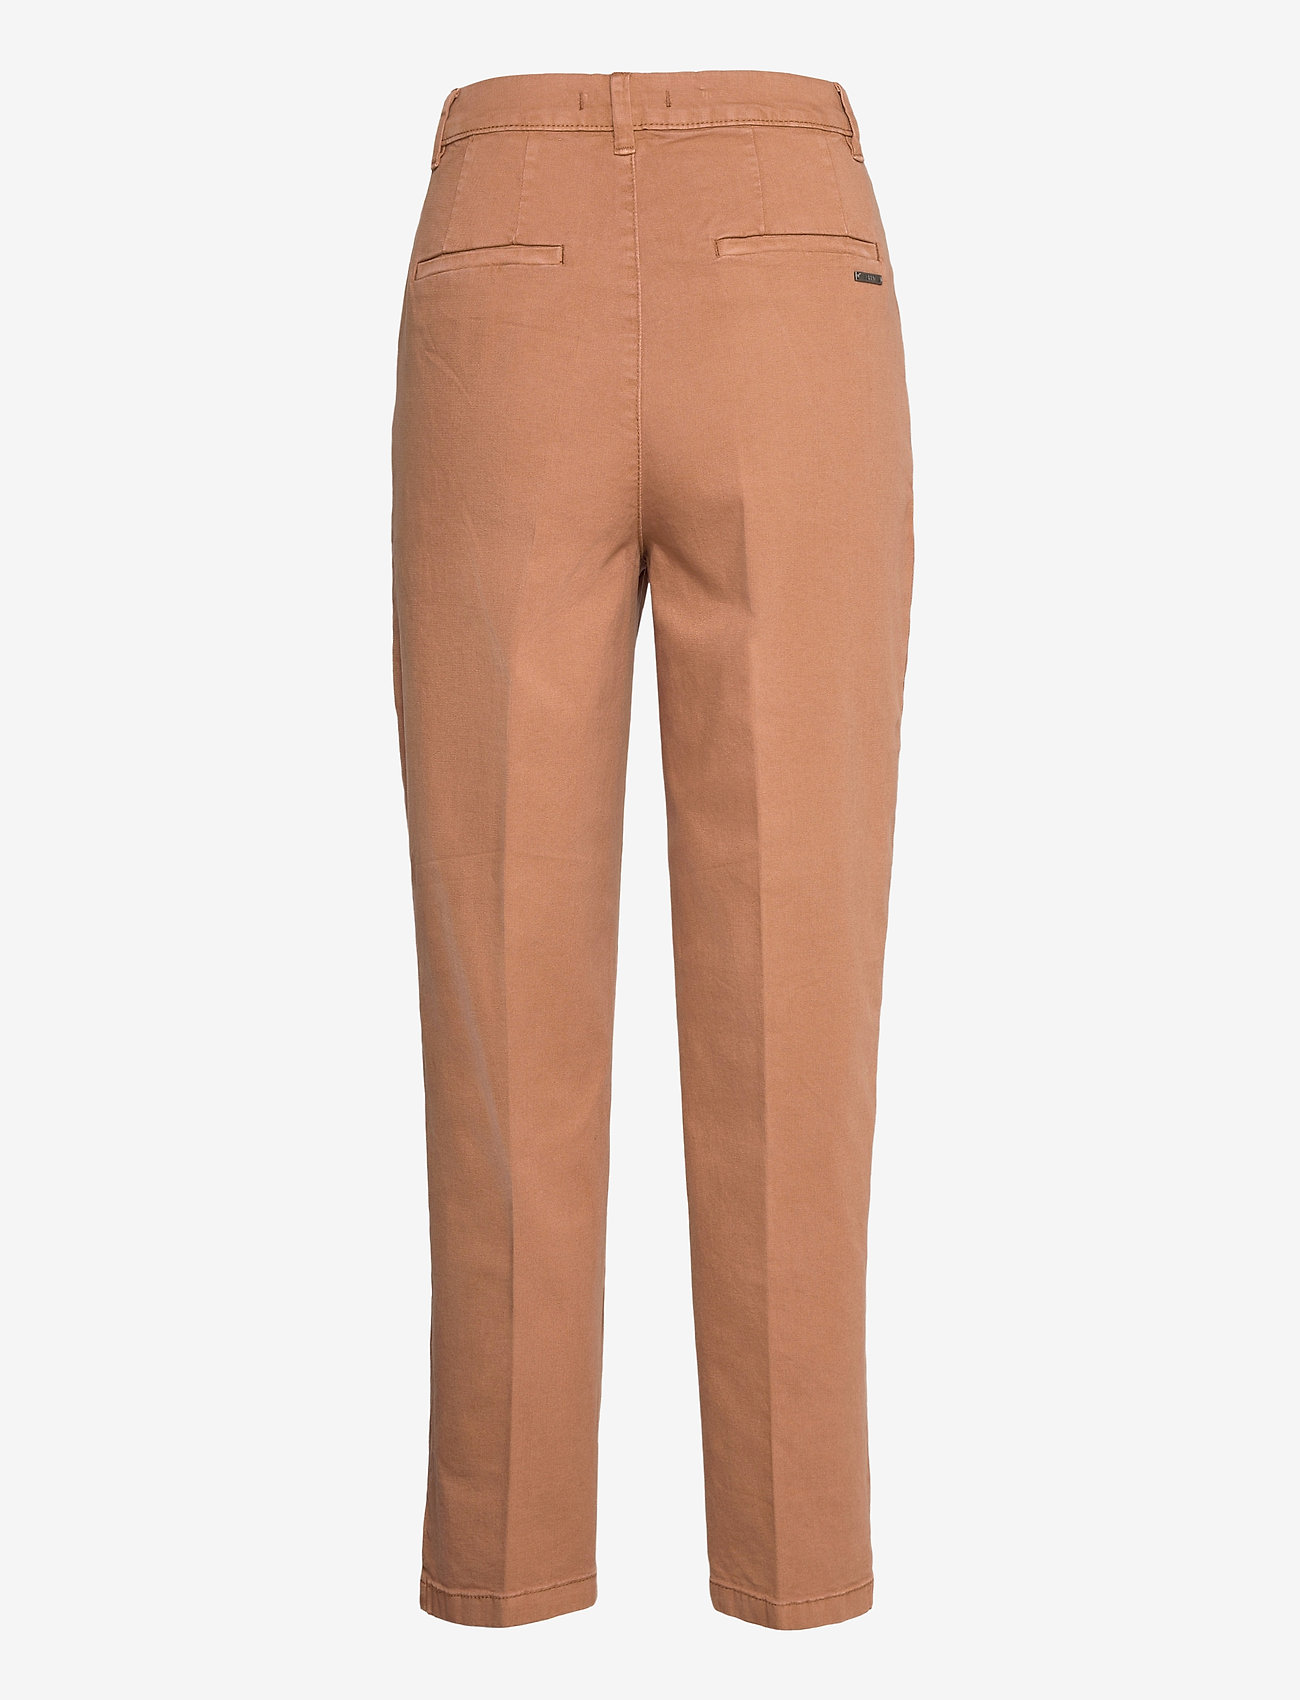 Esprit Casual - Chinos with organic cotton - chinos - rust brown - 1